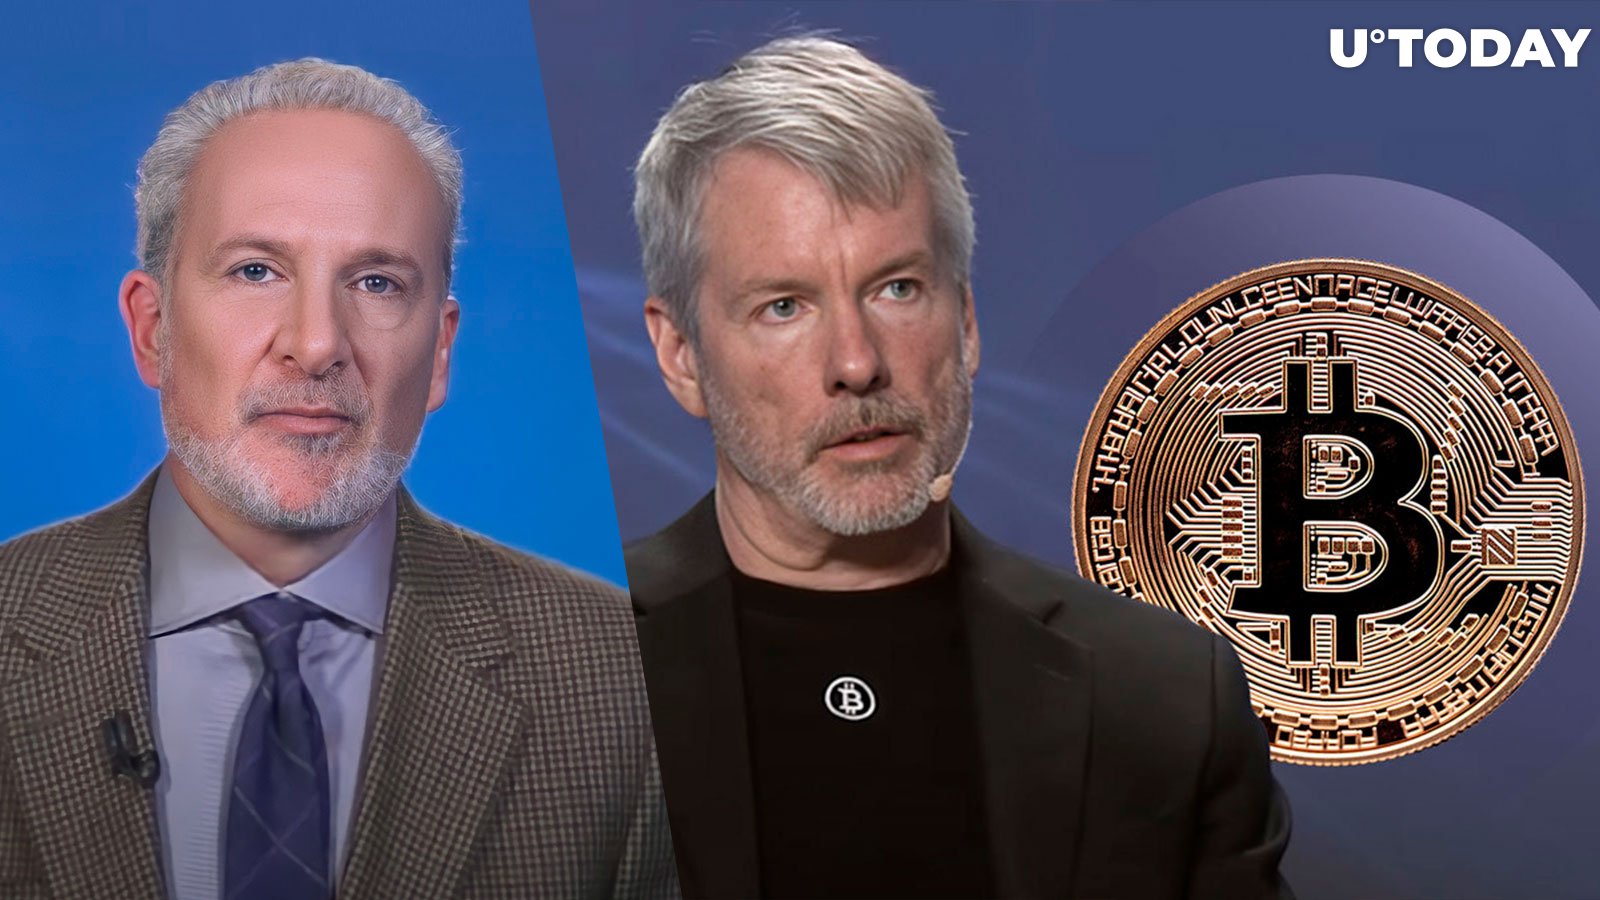 Bitcoin (BTC) Will Crash When Saylor Stops Buying, Peter Schiff Predicts